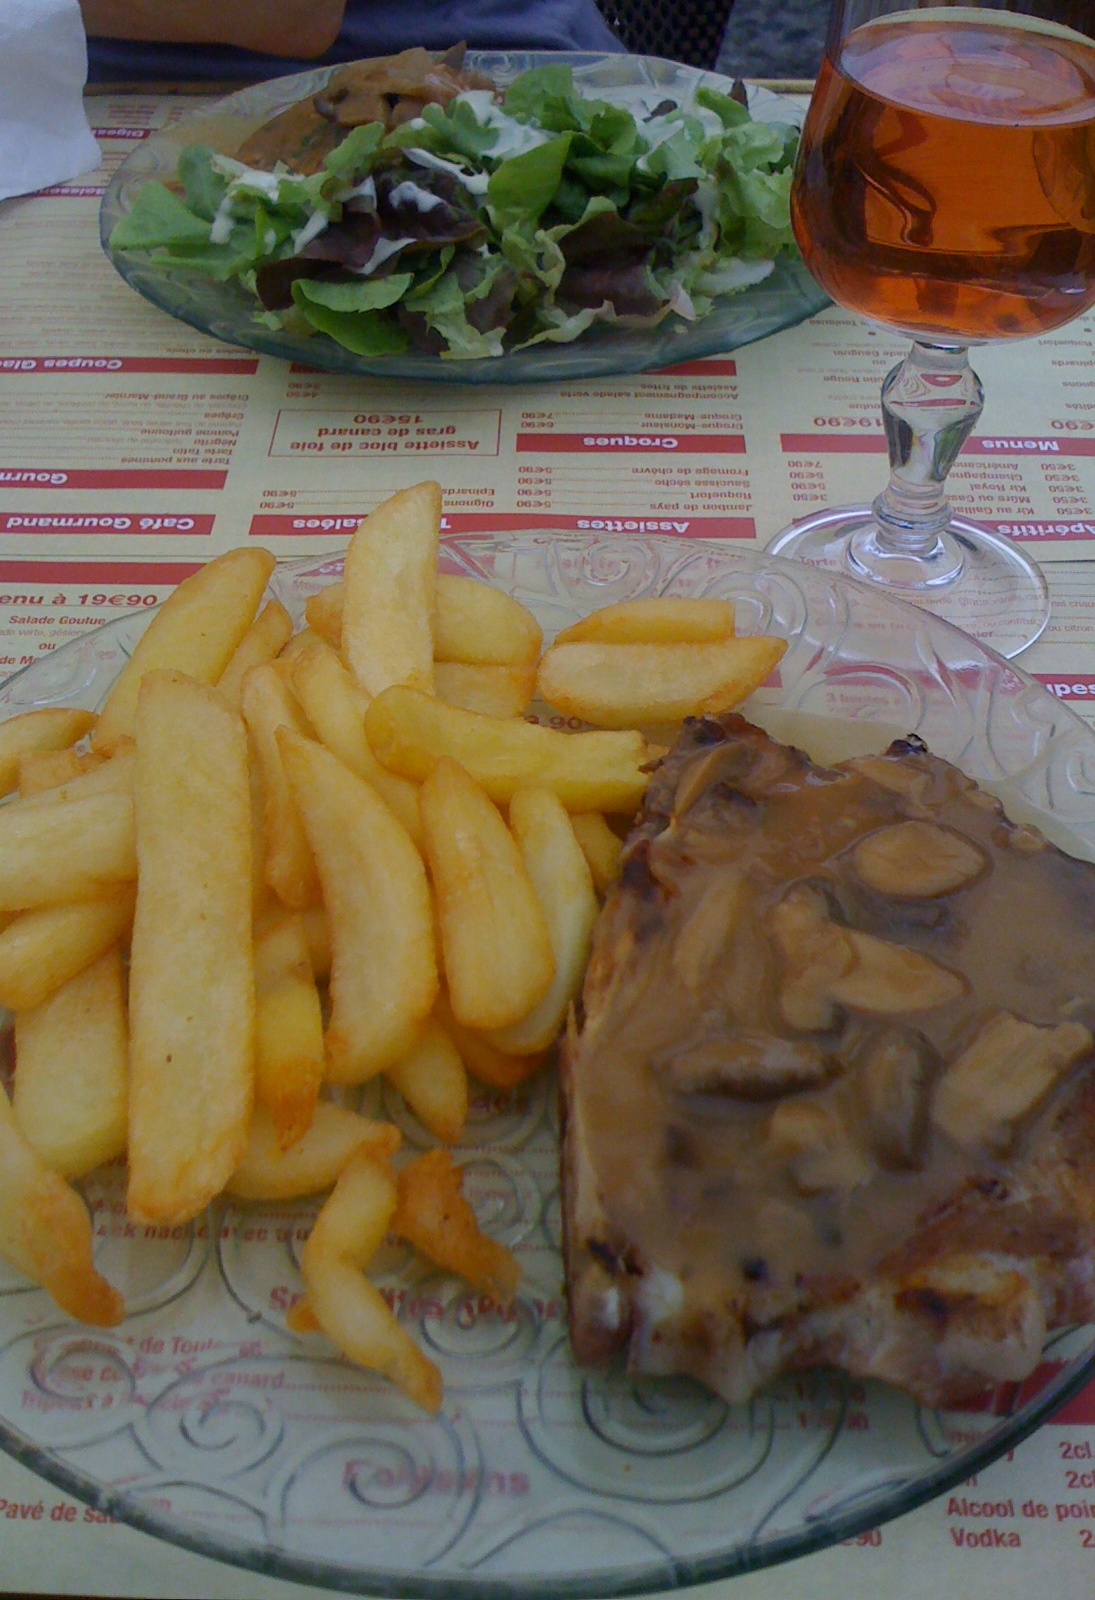 a glass plate with french fries and a plate full of food